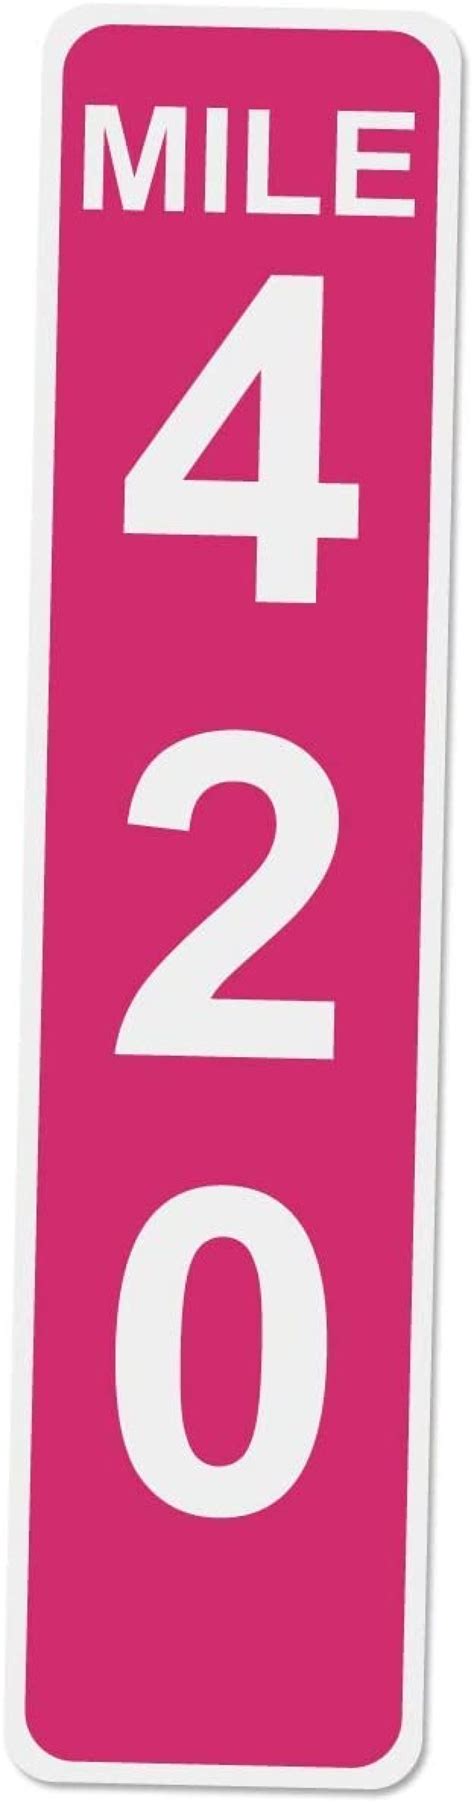 Lueinjoy Hot Pink Mile Marker 420 17 Inches Tall By 4 Inches Wide White